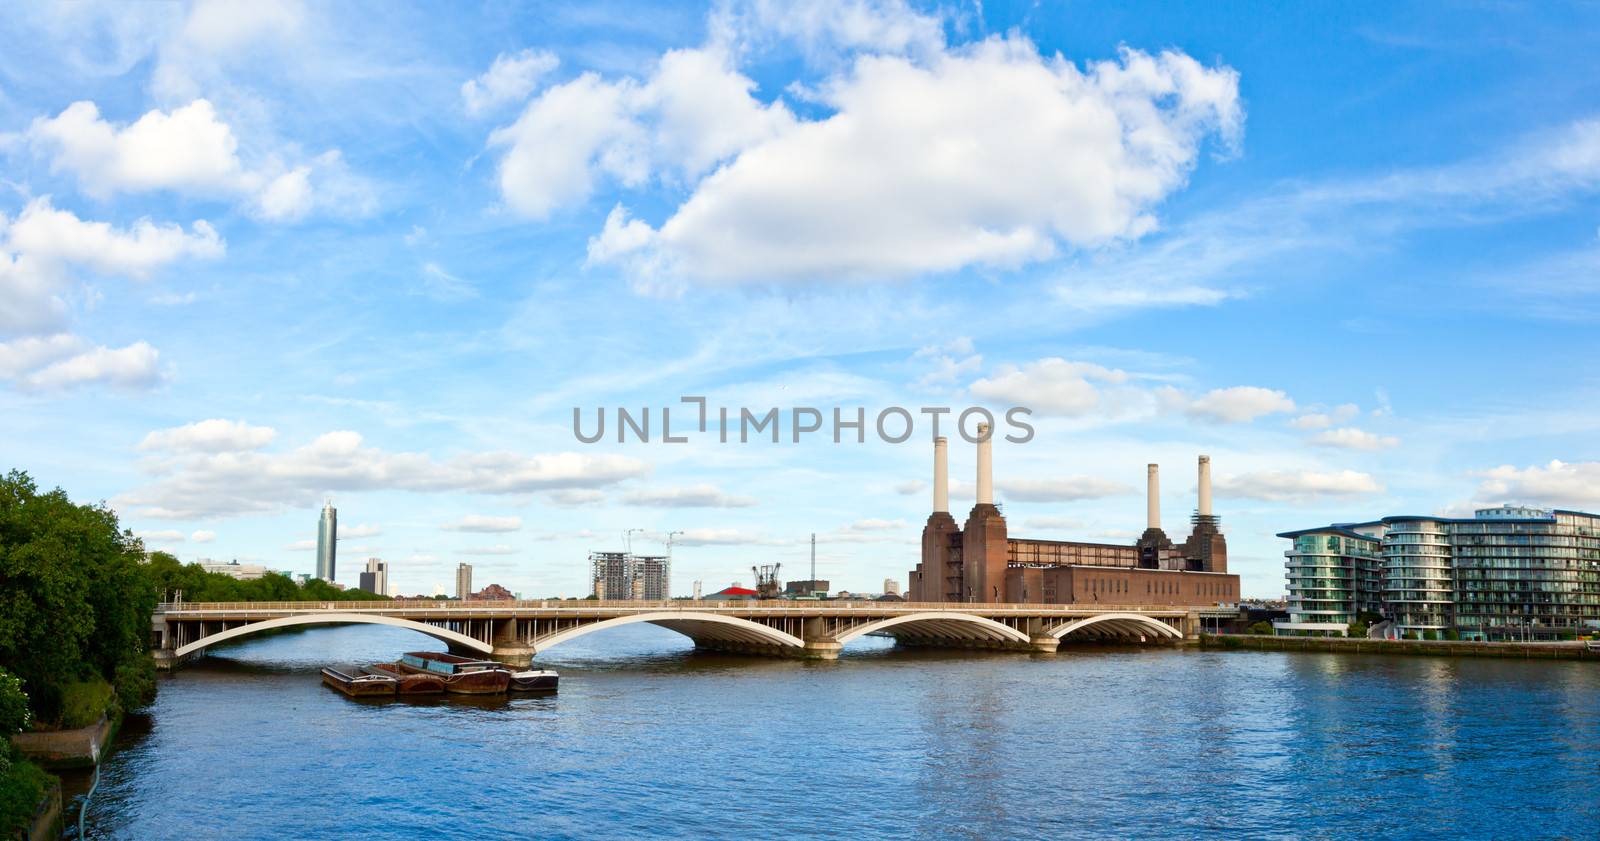 Panoramic view of Grosvenor Bridge with abandonded Battersea power station in London